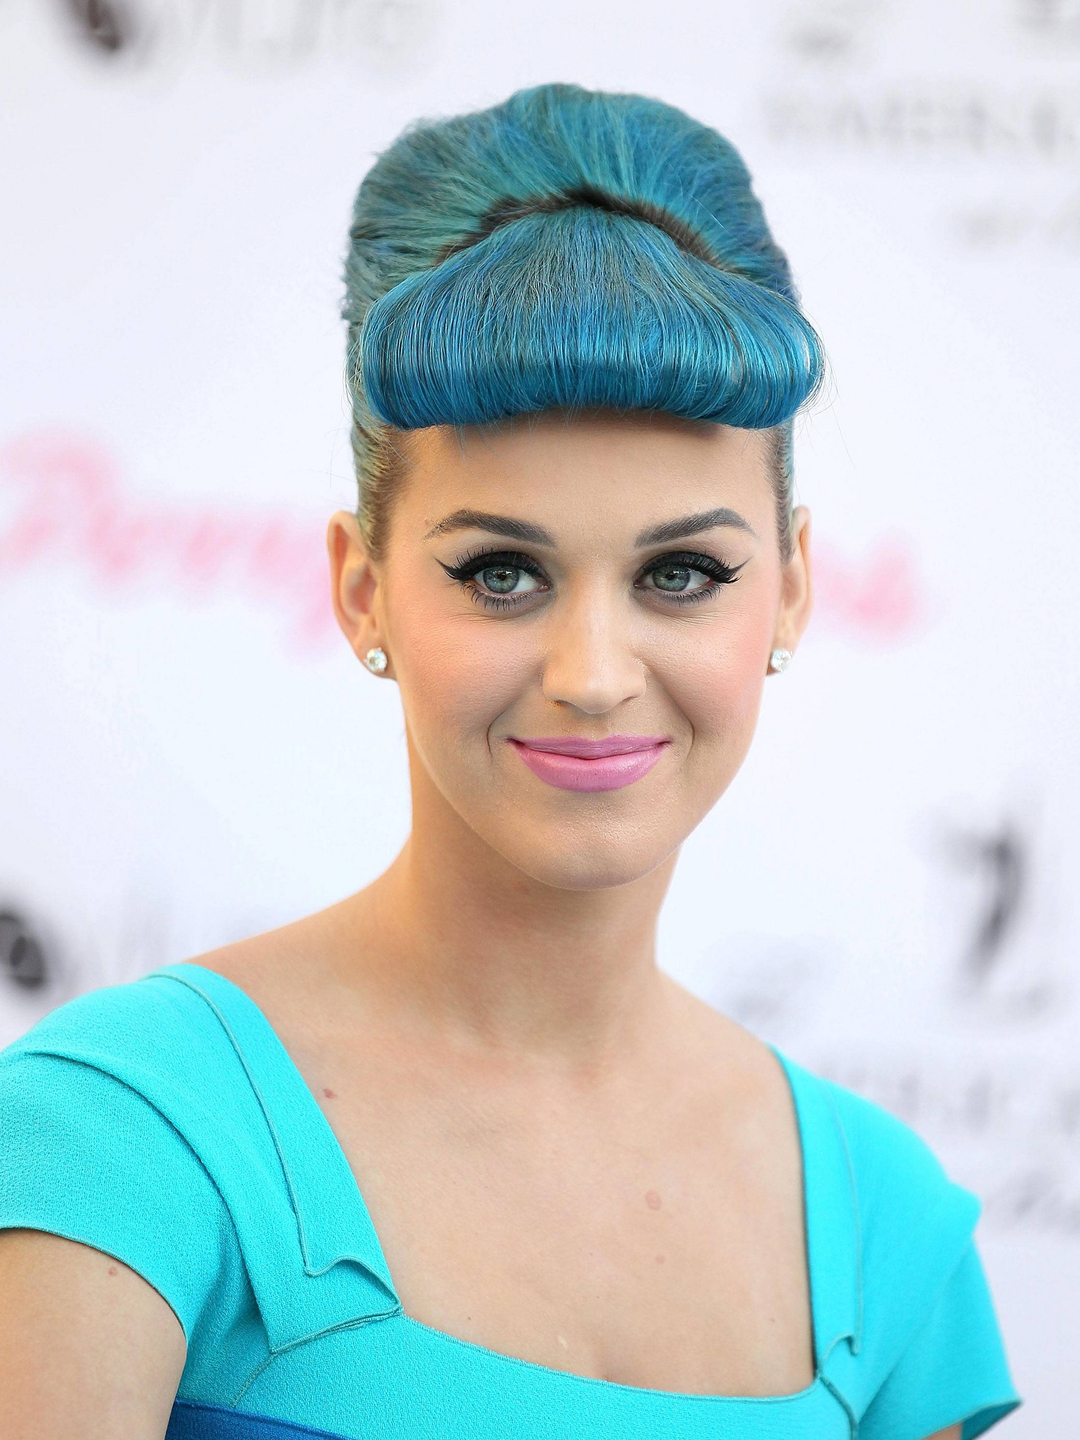 Katy Perry who is her father